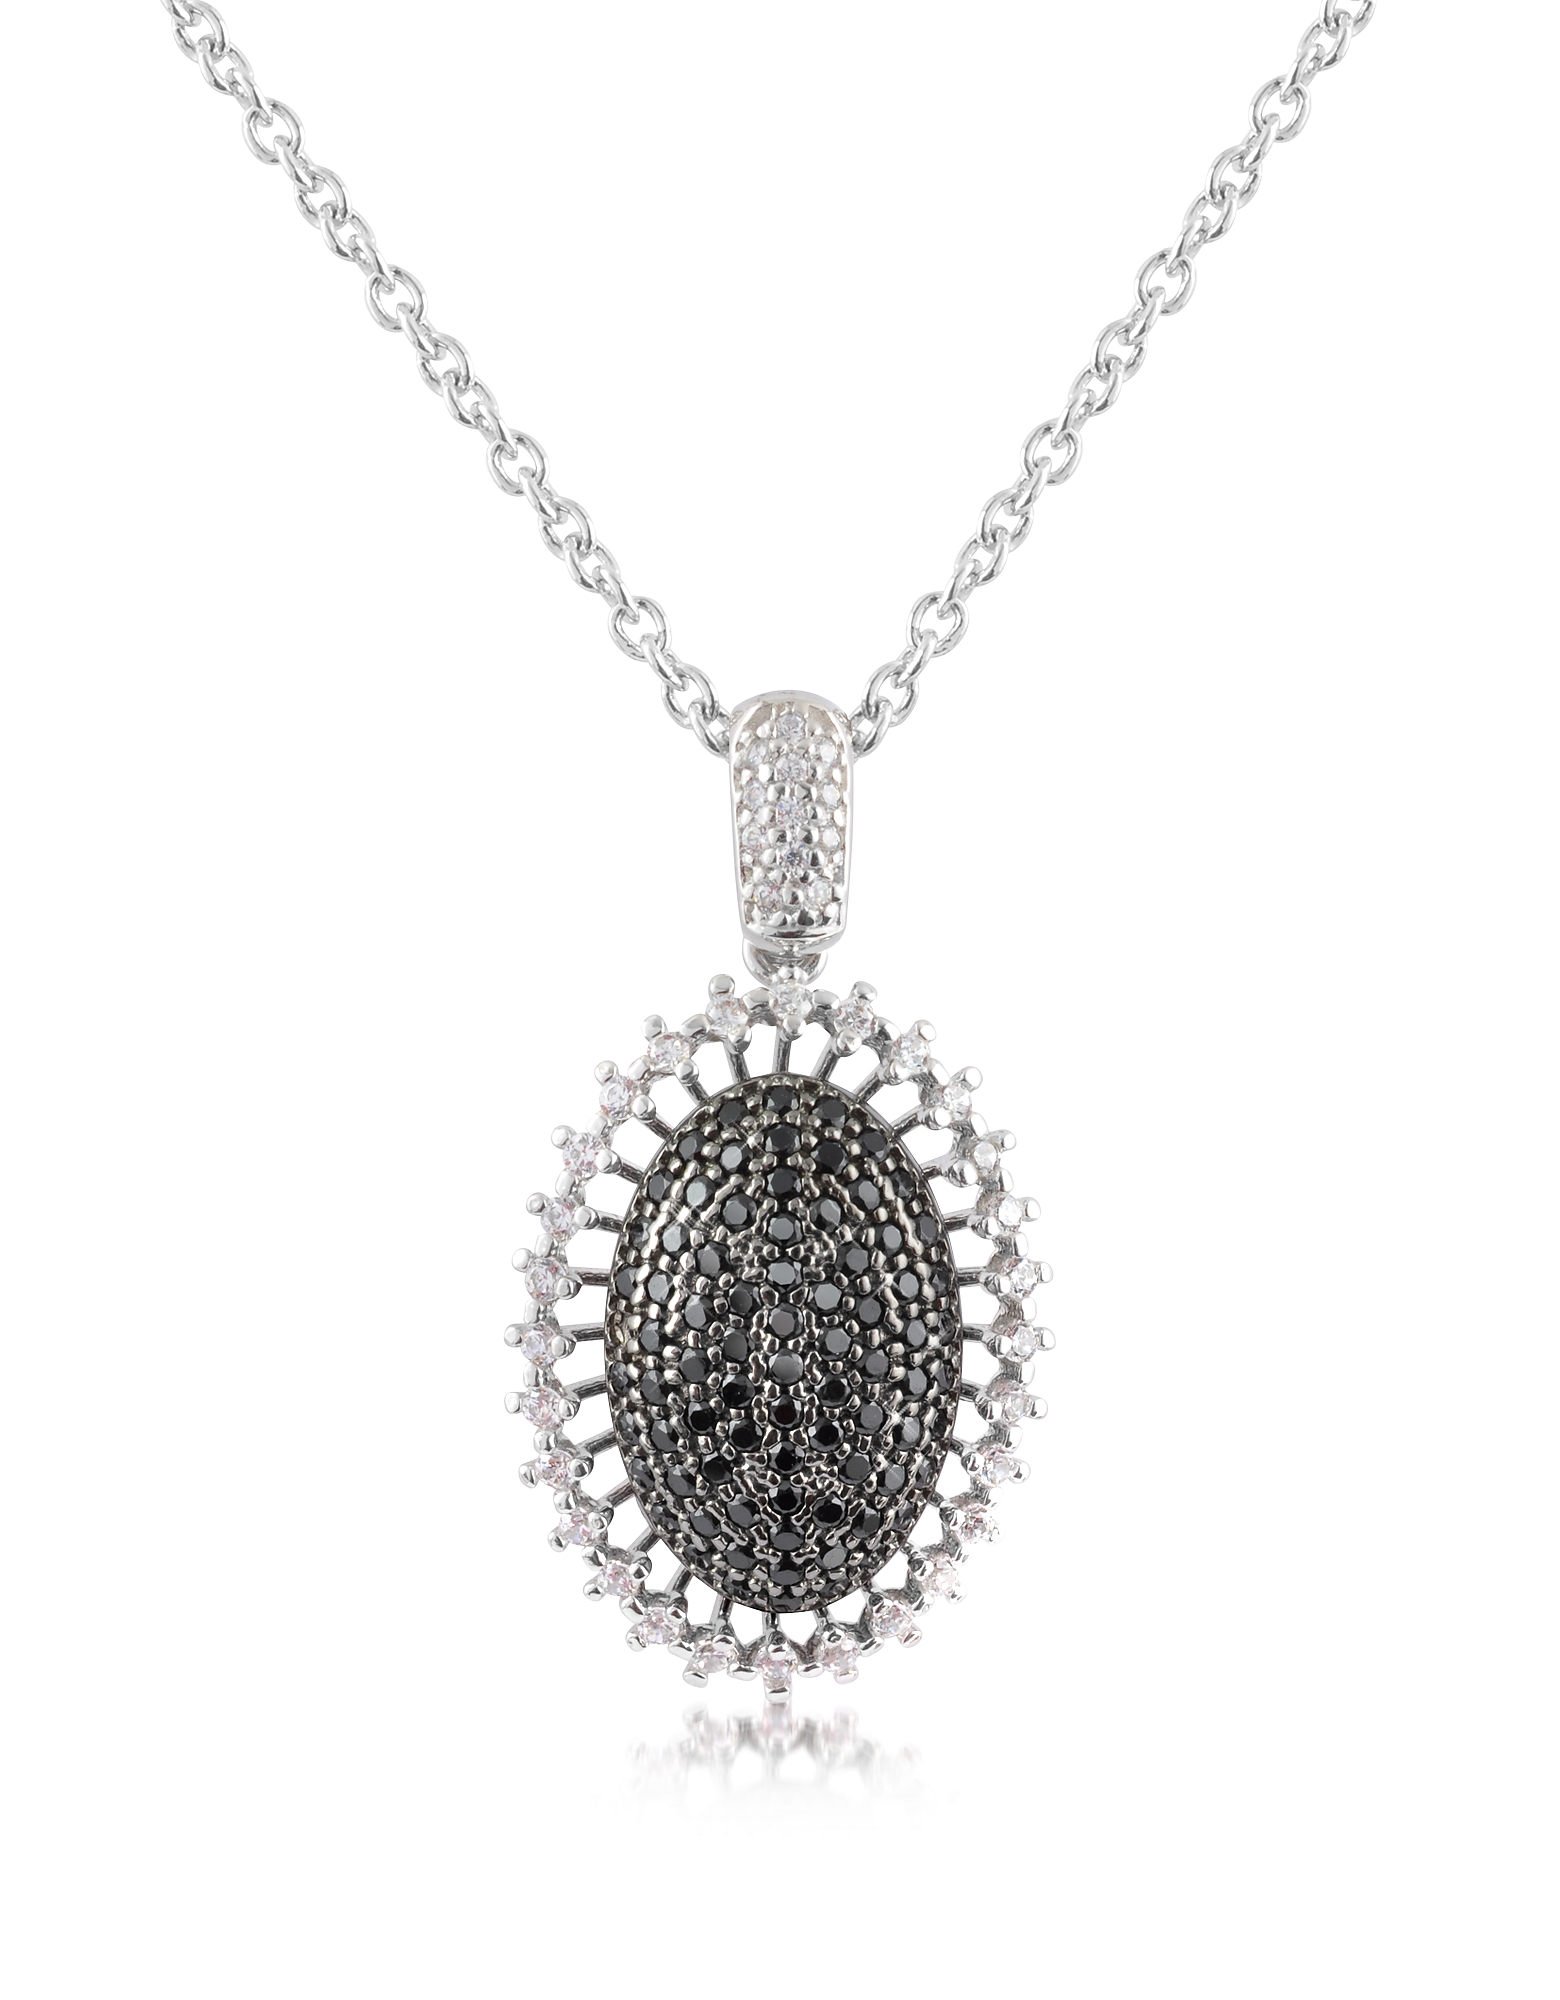 Black Cubic Zirconia and Sterling Silver Oval Pendant Necklace